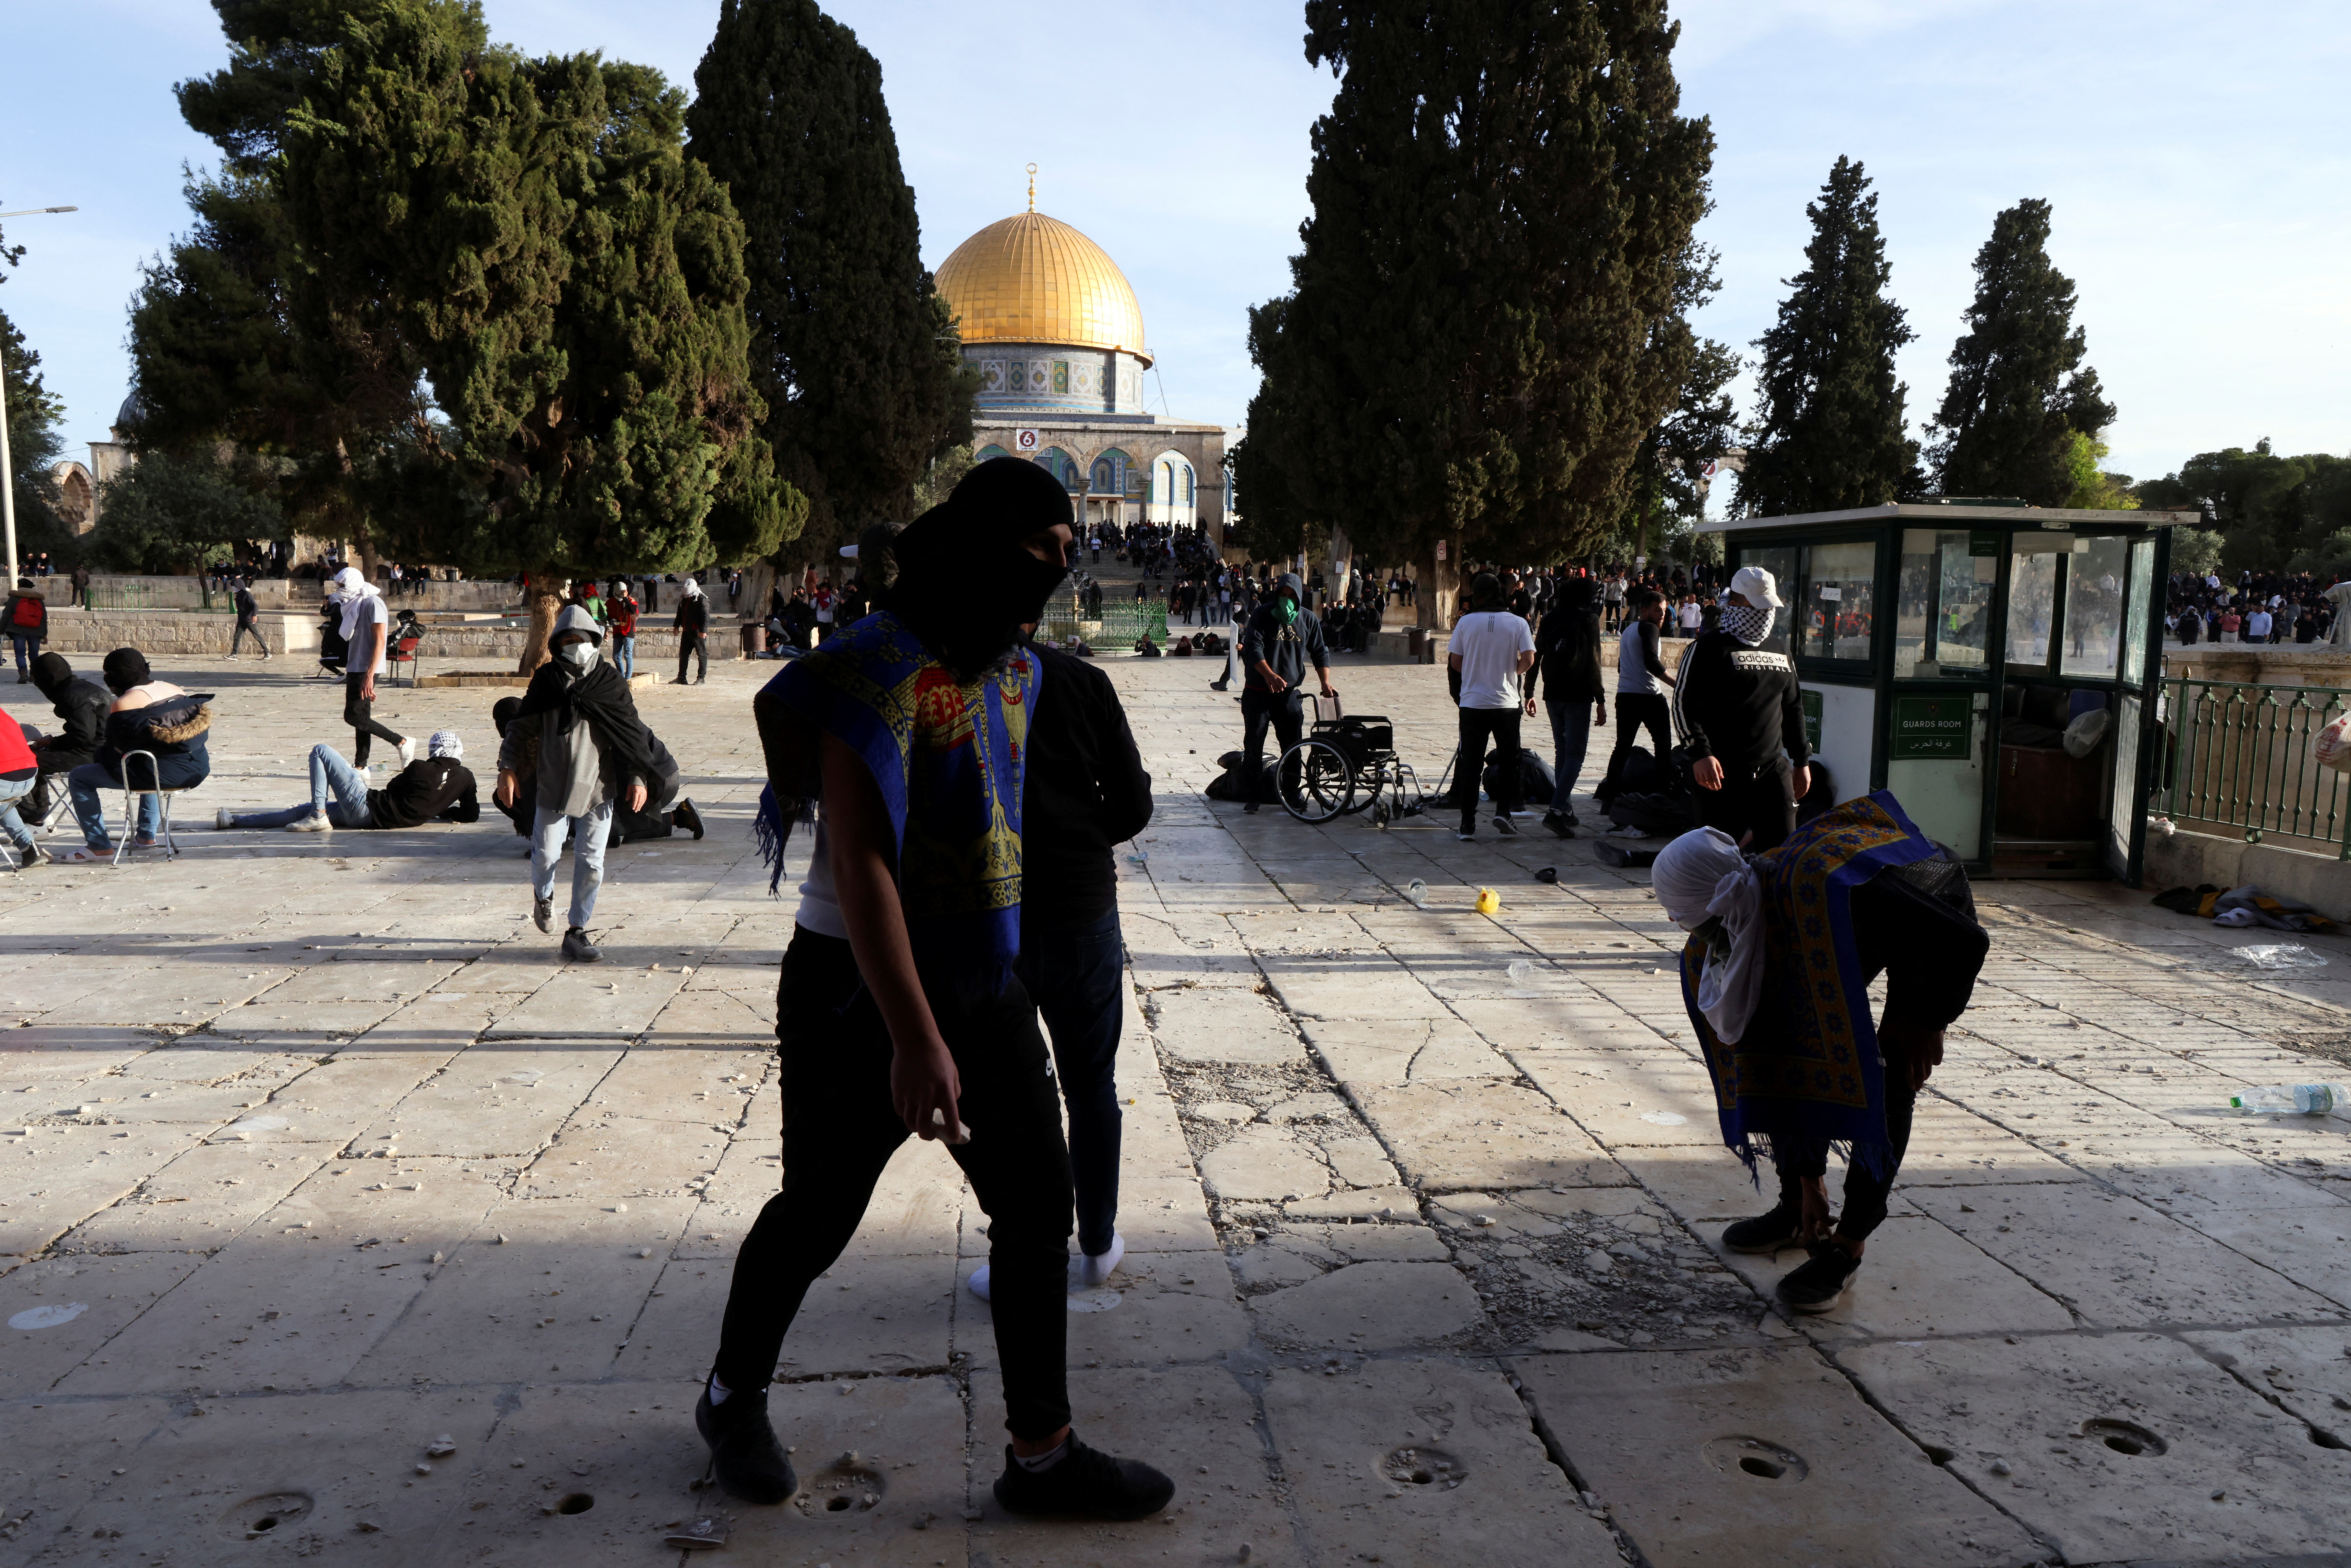 Palestinian protestors walk around during clashes with Israeli security forces at the compound that houses Al-Aqsa Mosque, known to Muslims as Noble Sanctuary and to Jews as Temple Mount, in Jerusalem's Old City